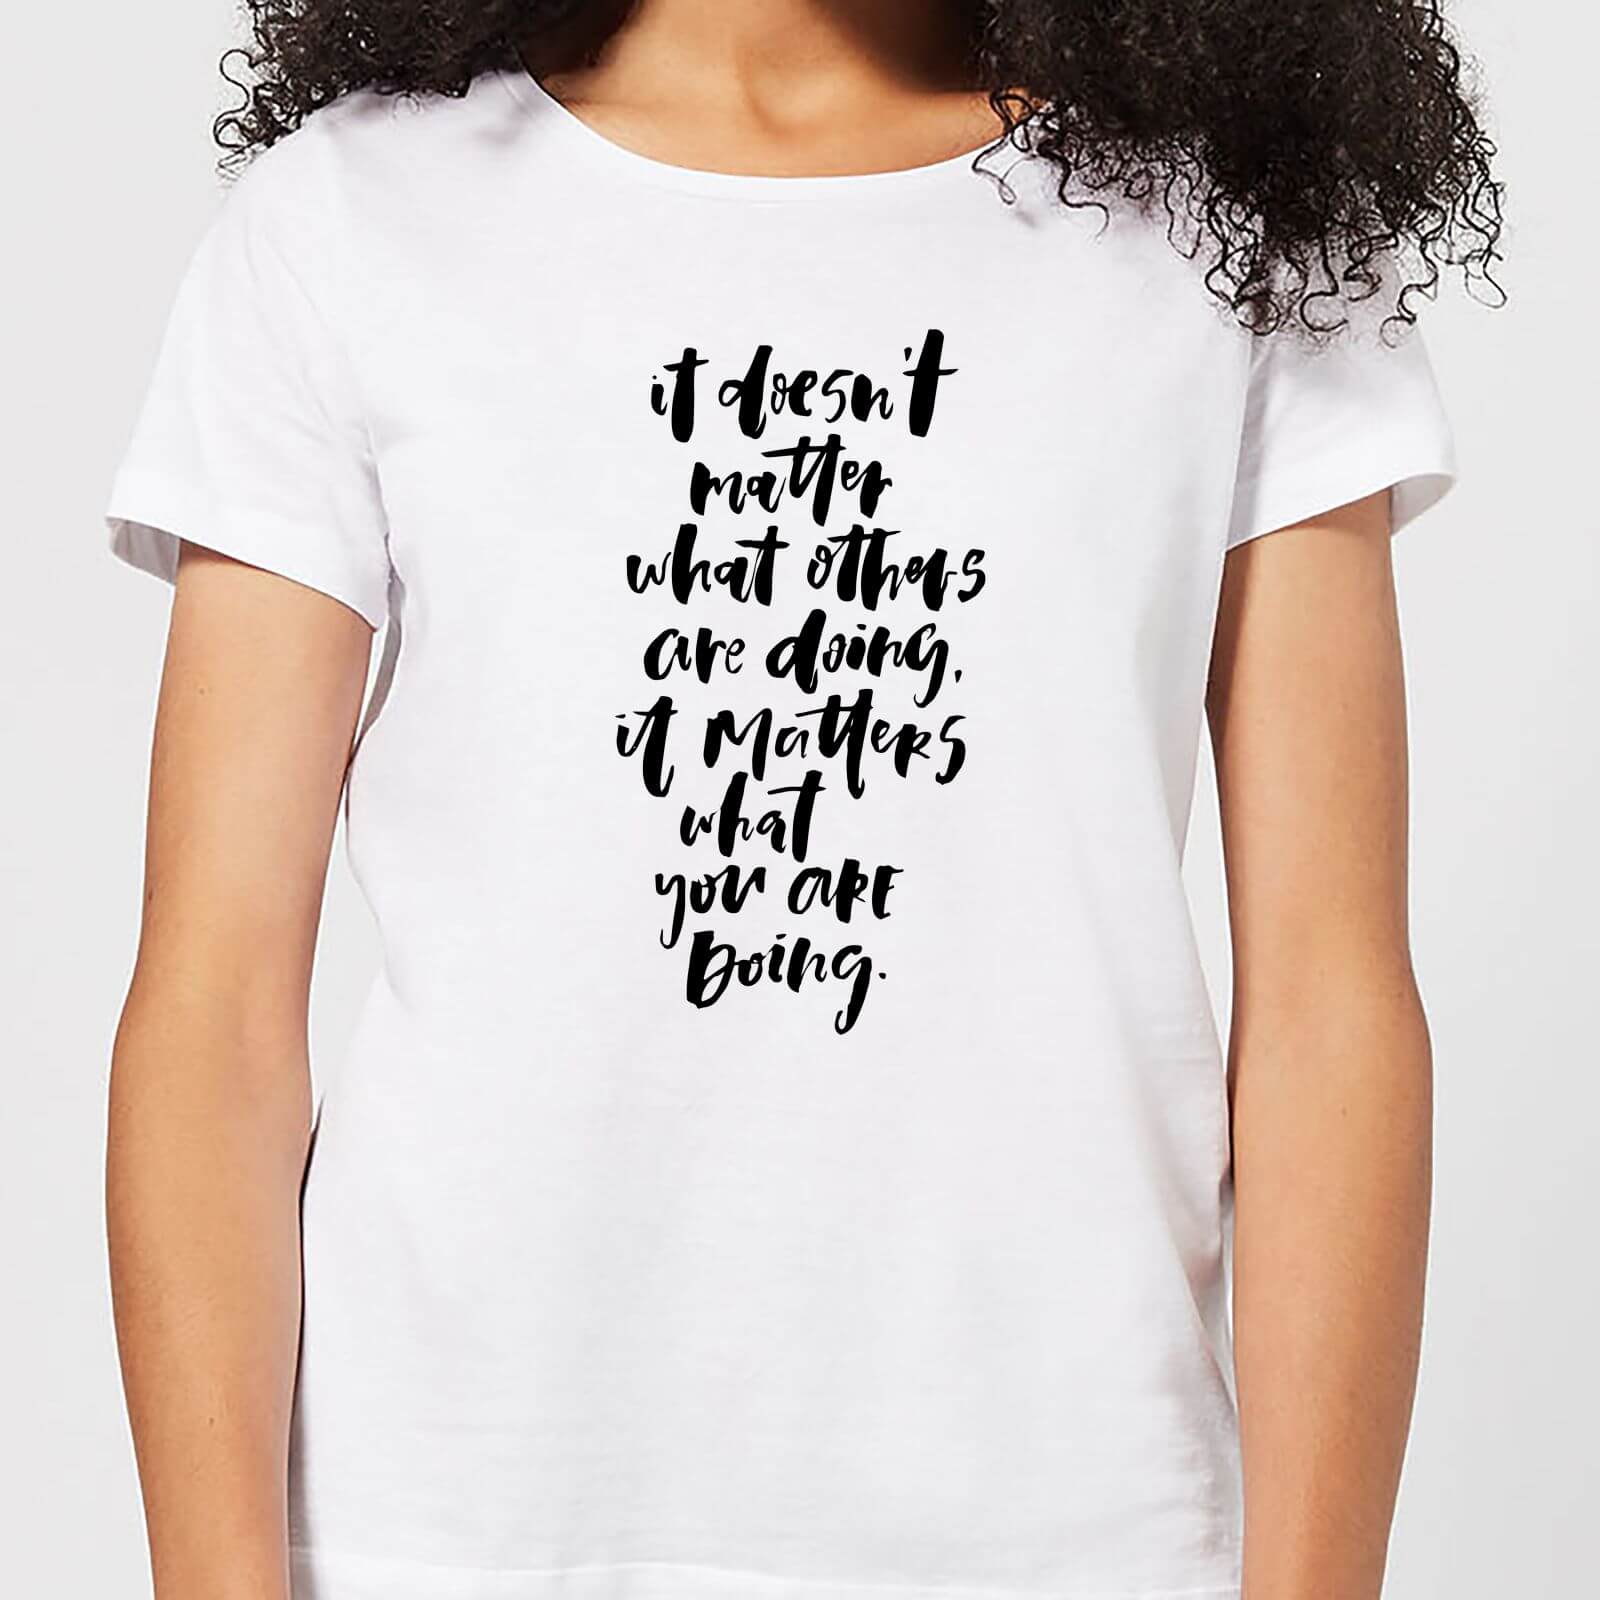 It Doesn't Matter What Others Are Doing Women's T-Shirt - White - S - White